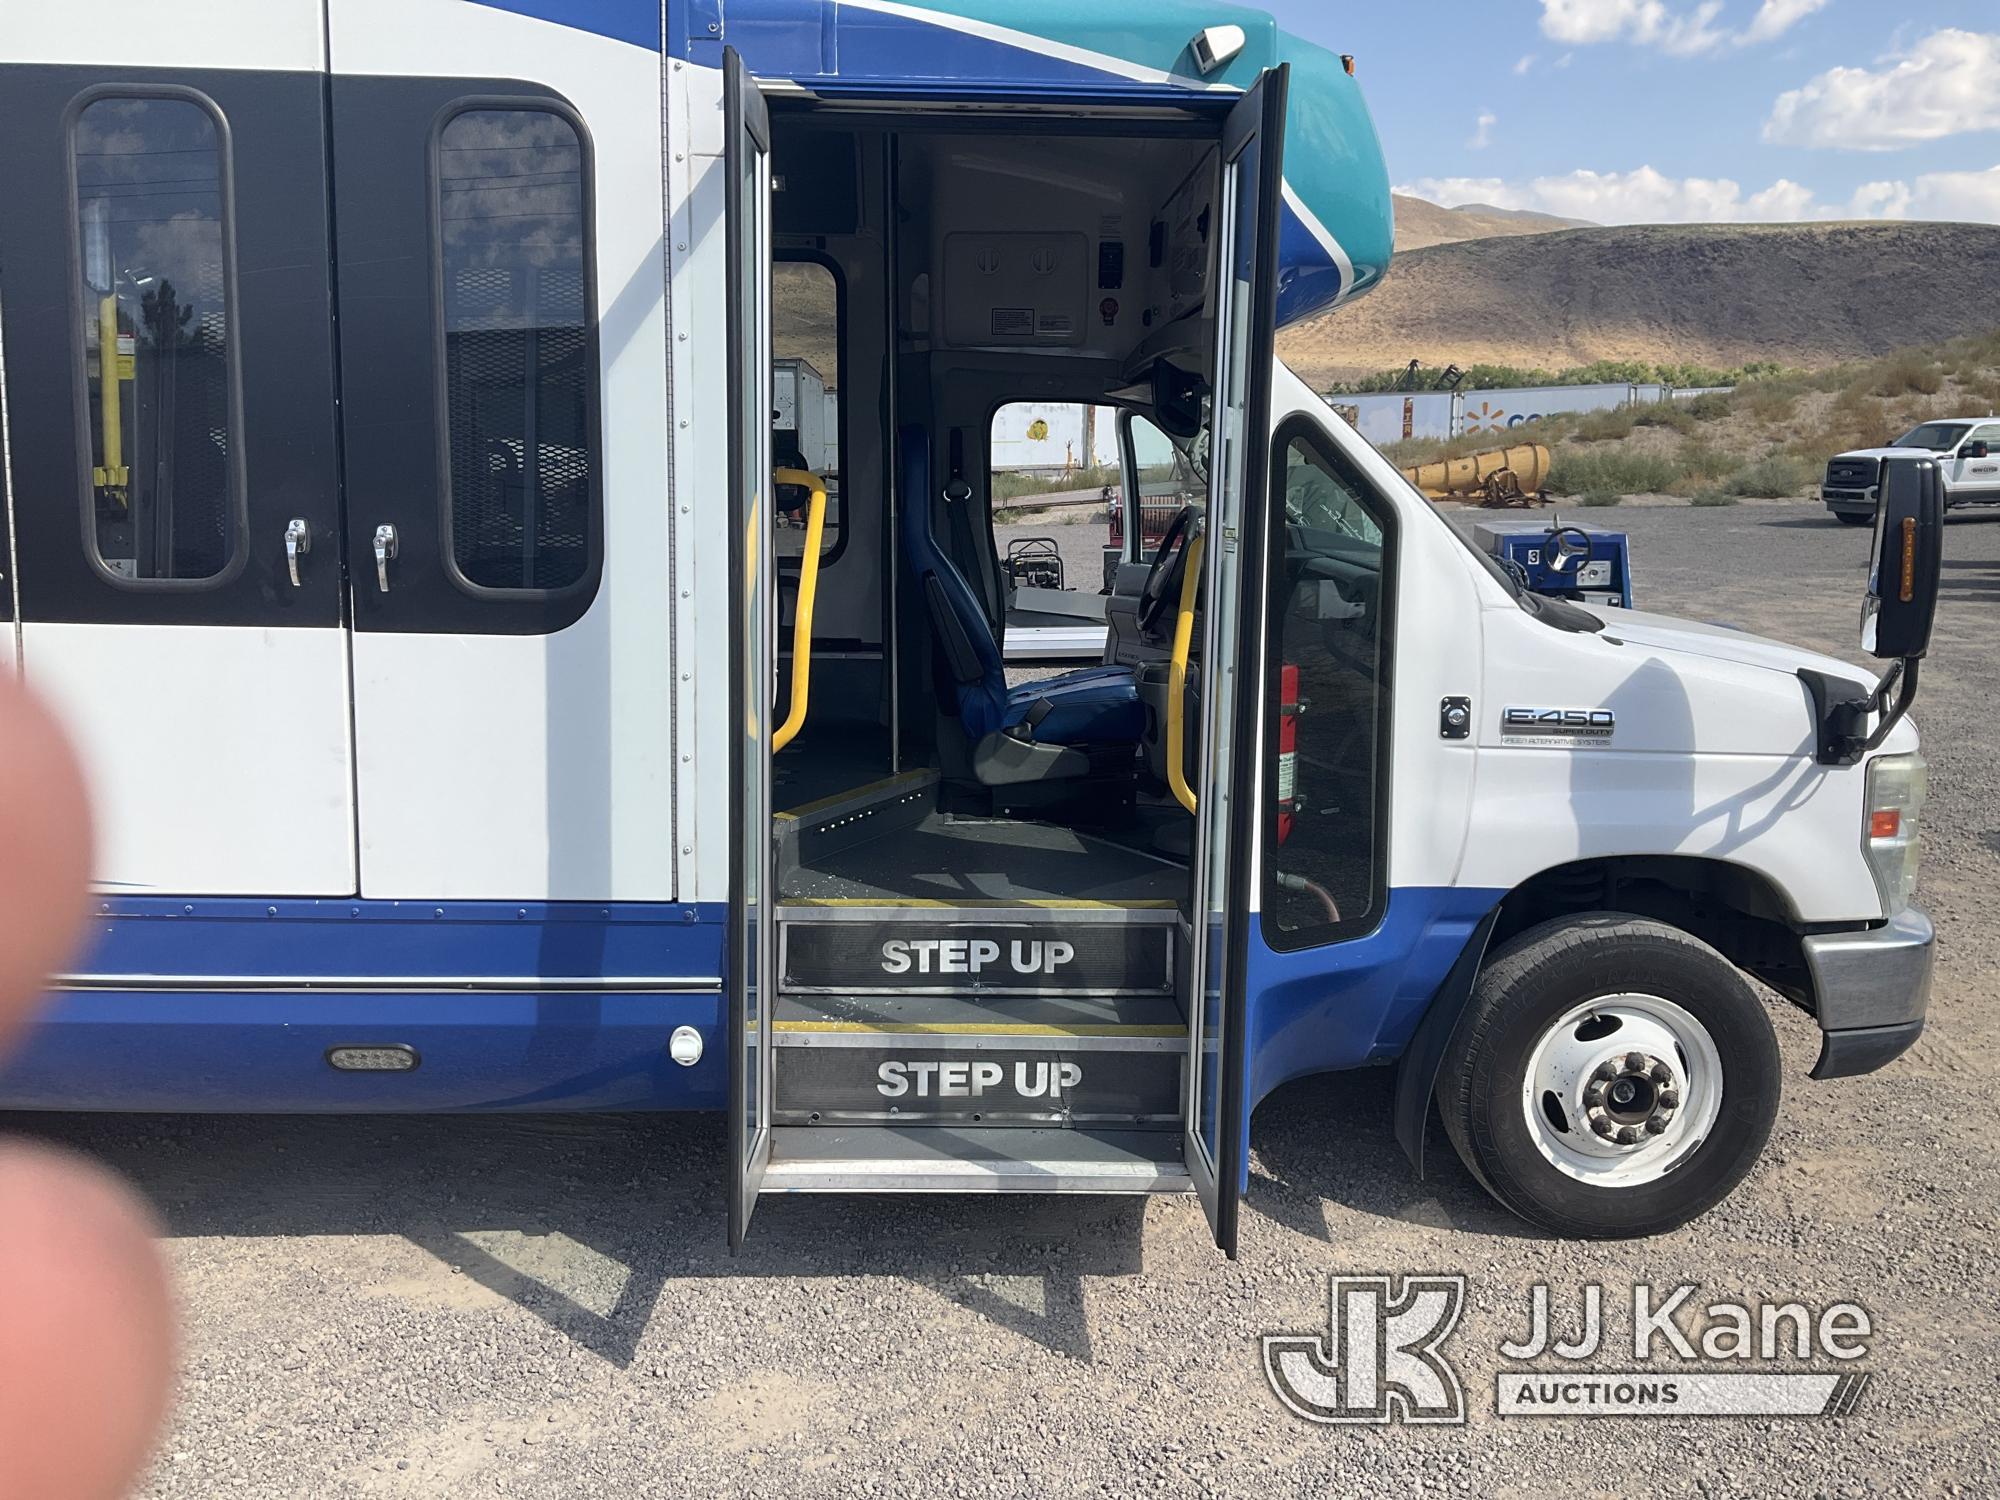 (McCarran, NV) 2015 Ford E450 Bus, Located In Reno Nv. Contact Nathan Tiedt To Preview 775-240-1030